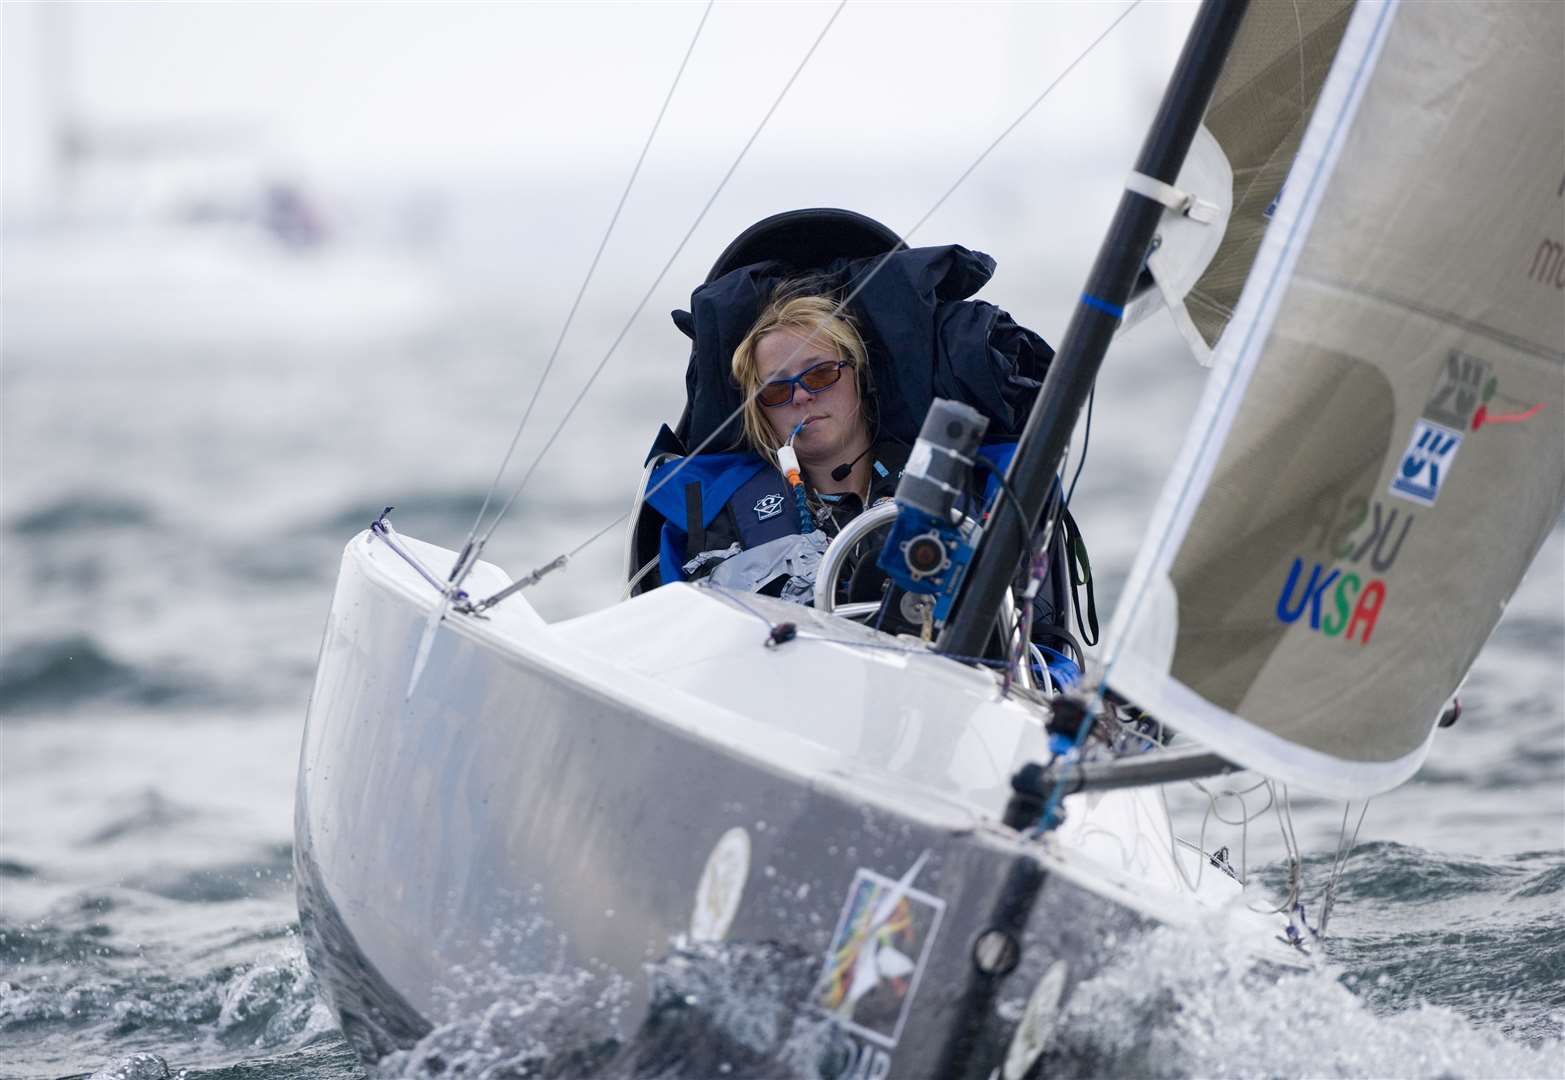 Peter Williams documented the remarkable efforts of quadriplegic Hilary Lister, who sailed solo around the UK in 2019